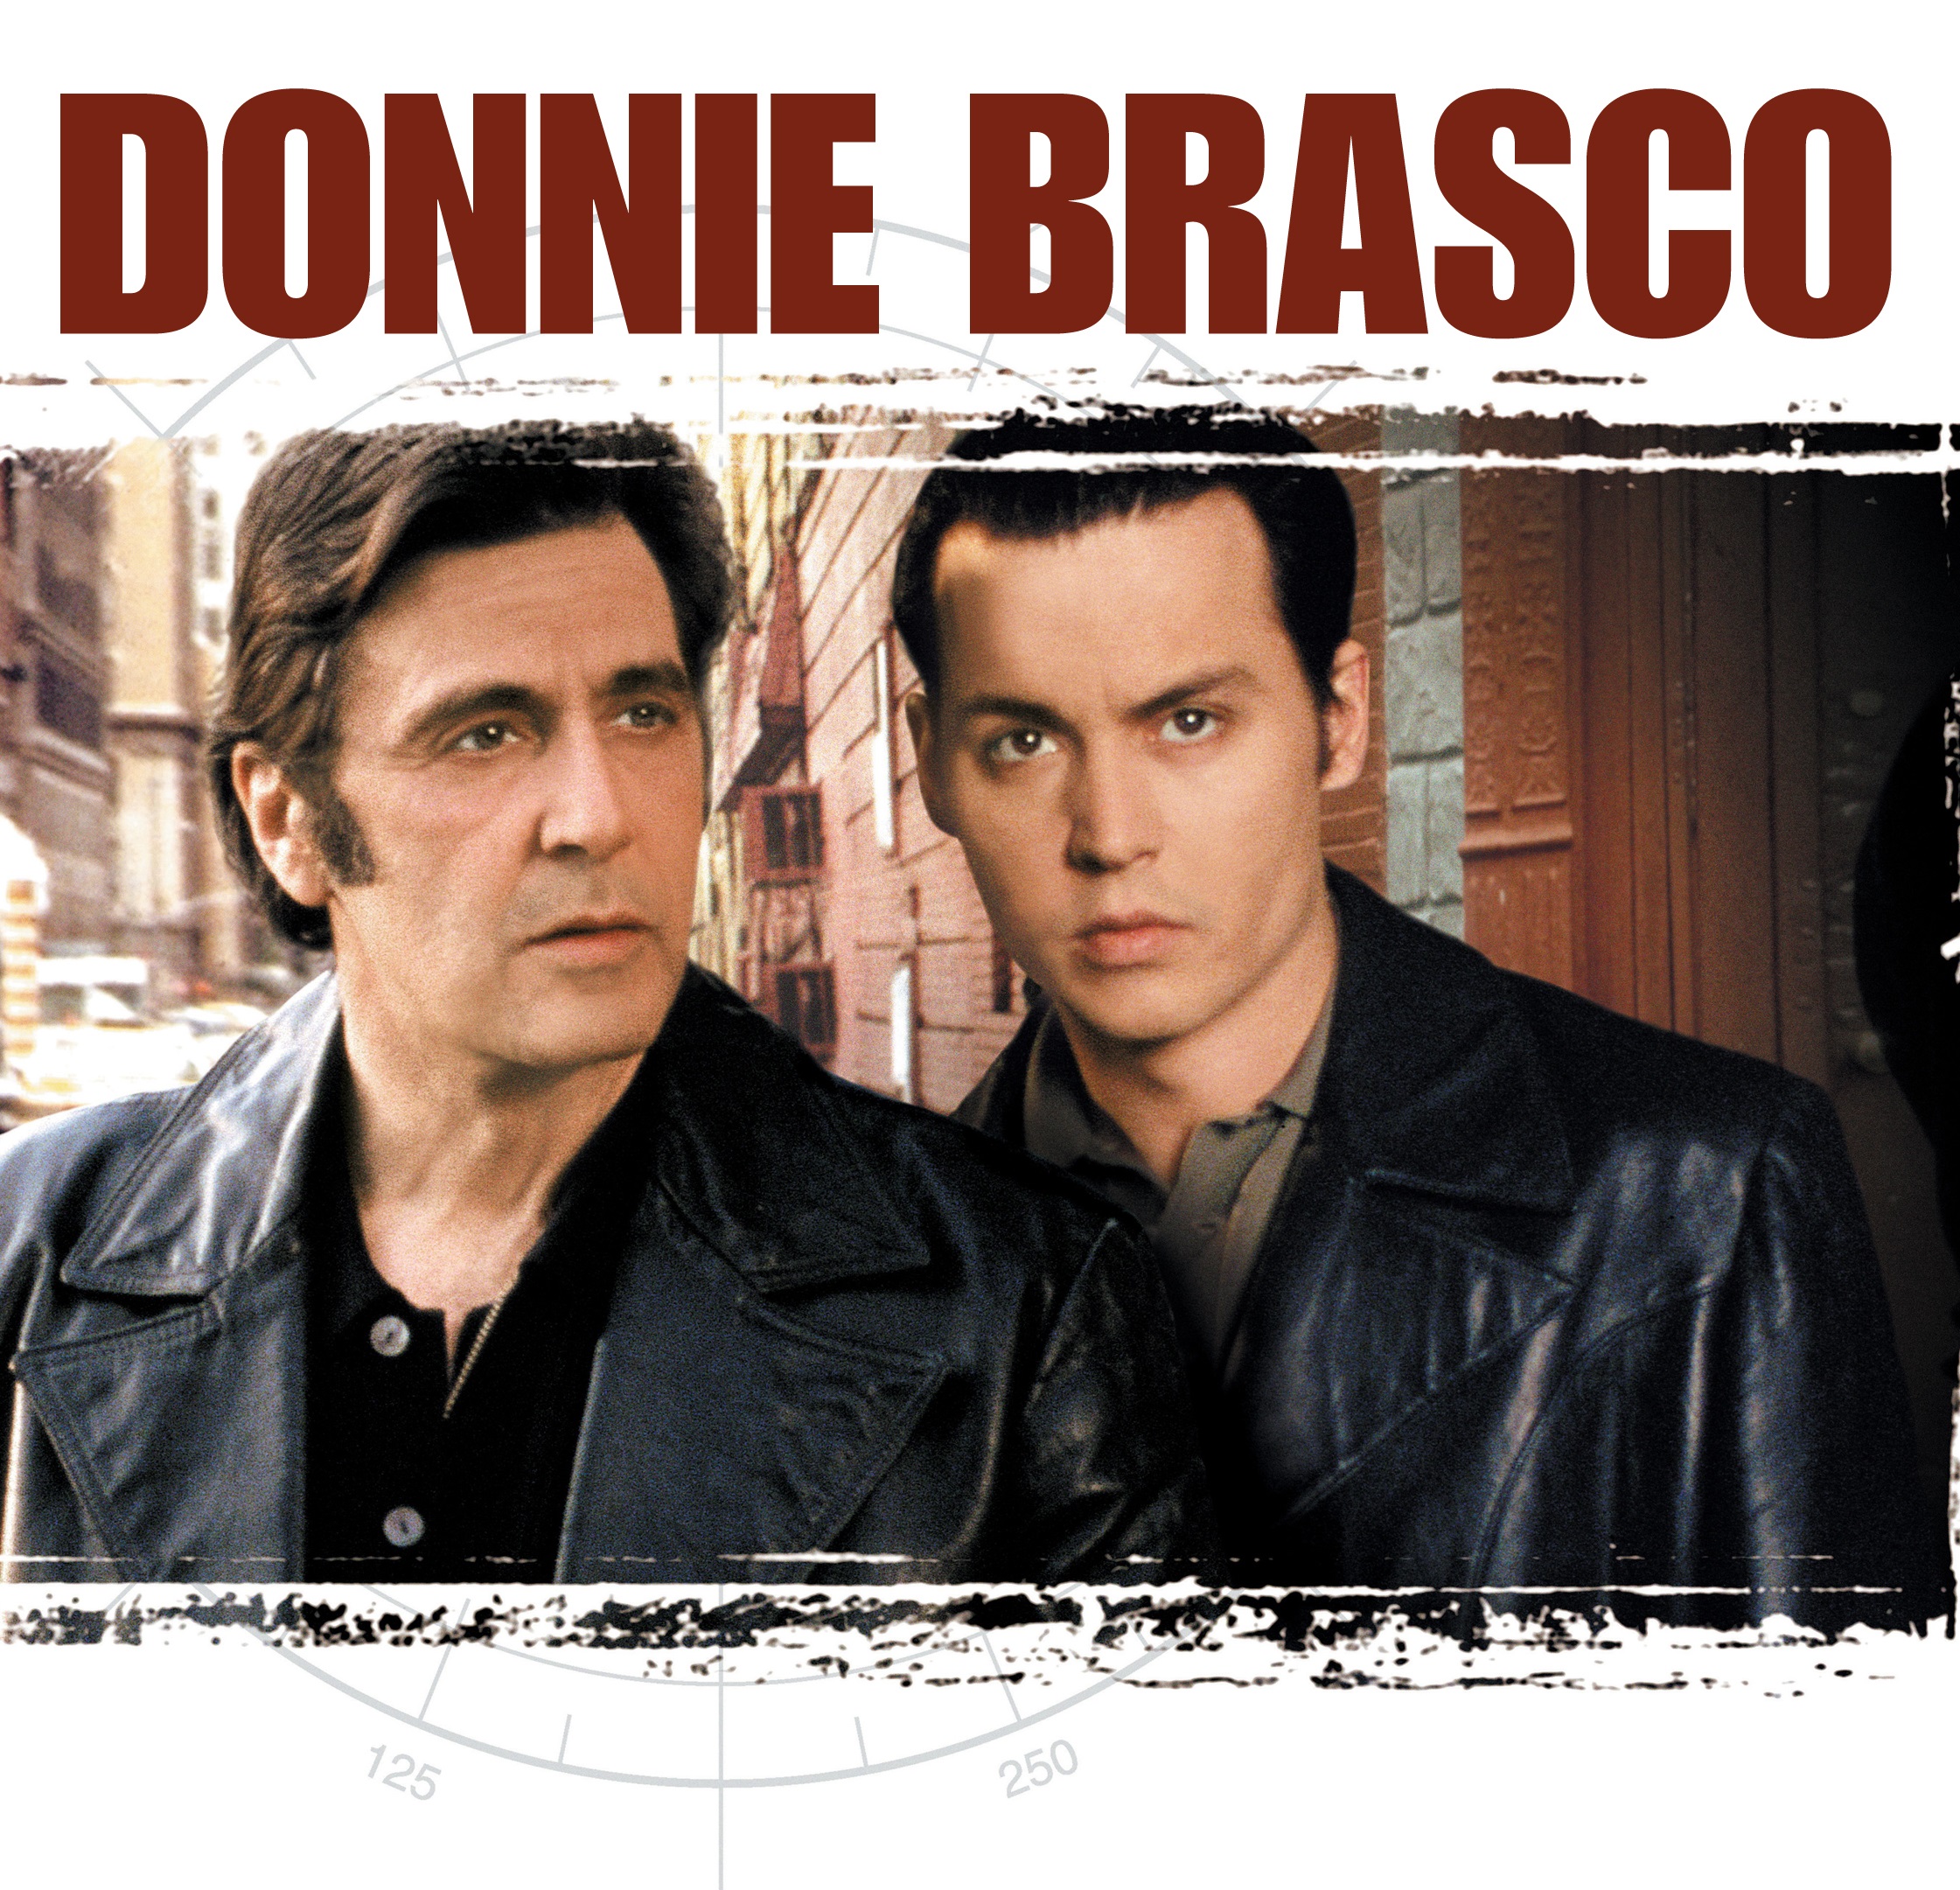 43-facts-about-the-movie-donnie-brasco